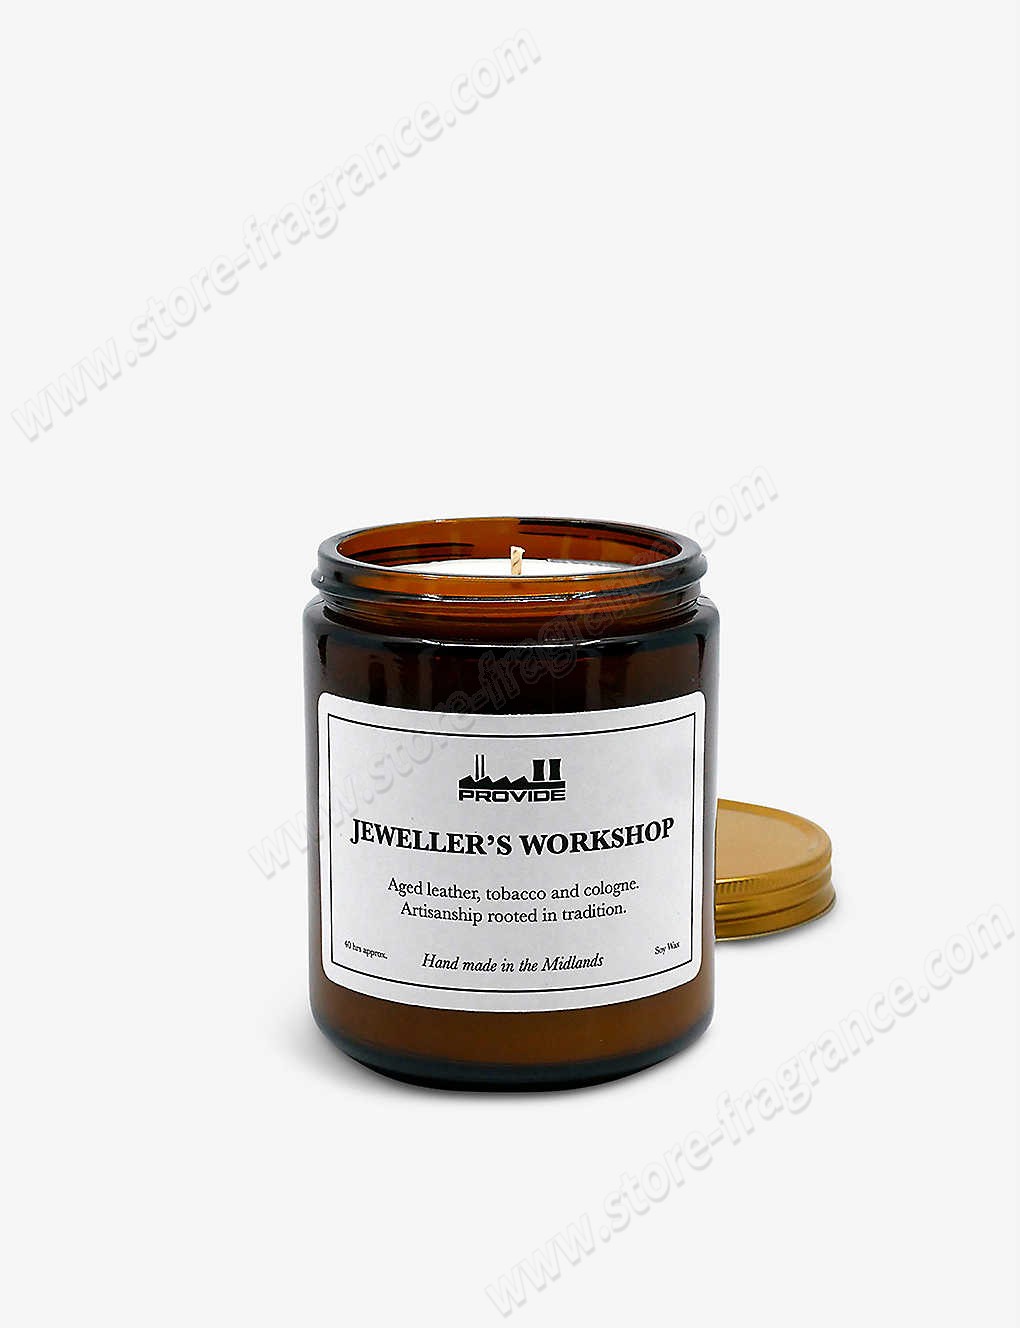 PROVIDE/Jeweller’s Workshop soy scented candle 200g ✿ Discount Store - PROVIDE/Jeweller’s Workshop soy scented candle 200g ✿ Discount Store